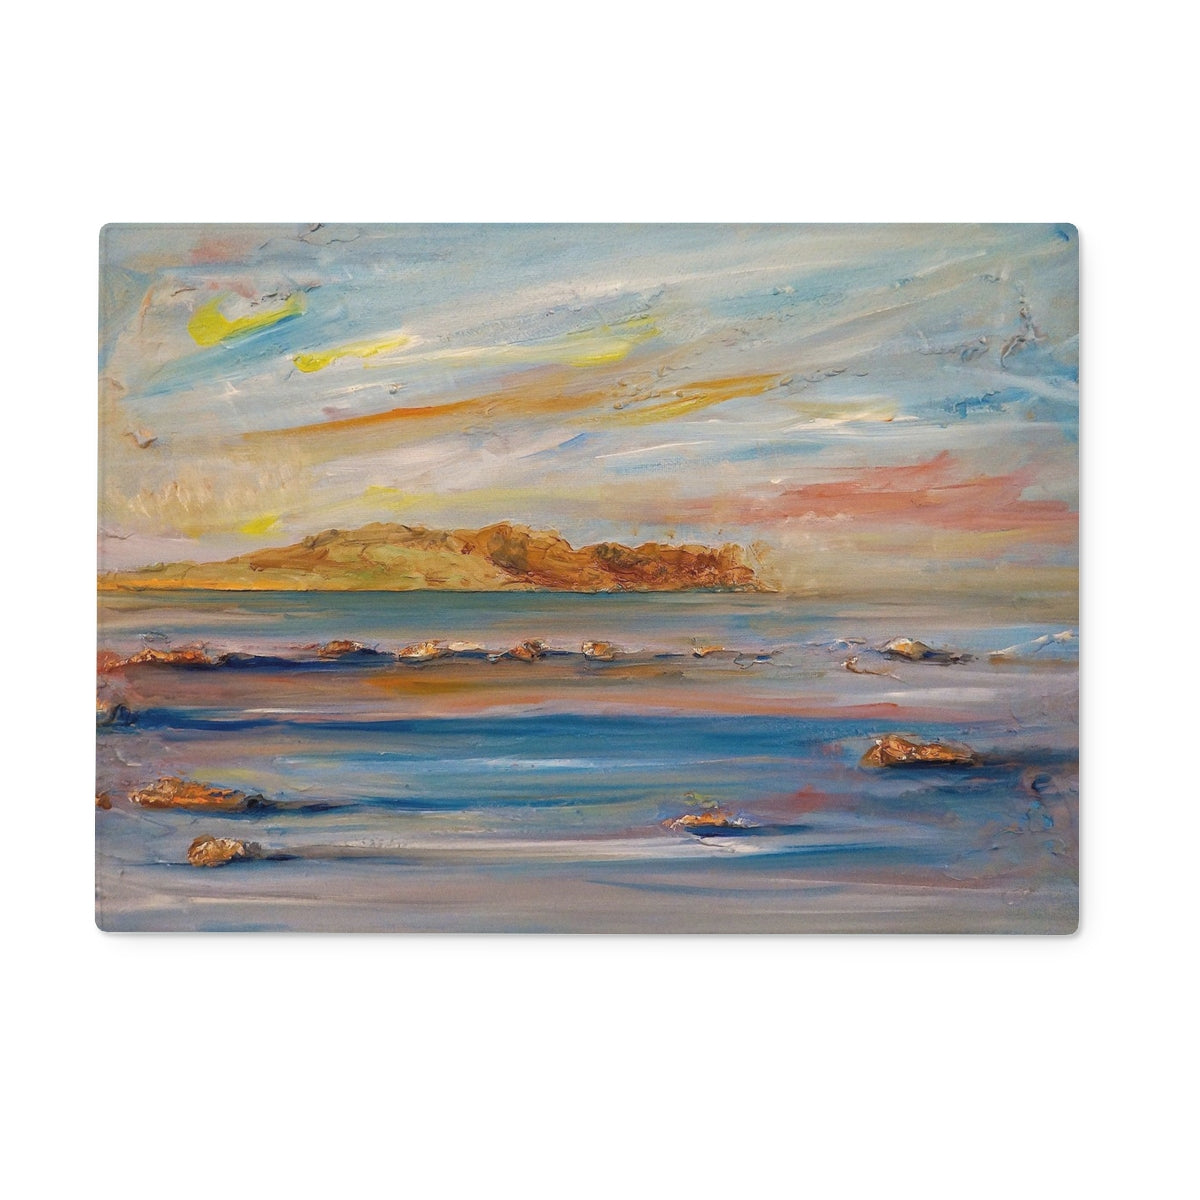 Tiree Dawn Art Gifts Glass Chopping Board-Glass Chopping Boards-Hebridean Islands Art Gallery-15"x11" Rectangular-Paintings, Prints, Homeware, Art Gifts From Scotland By Scottish Artist Kevin Hunter